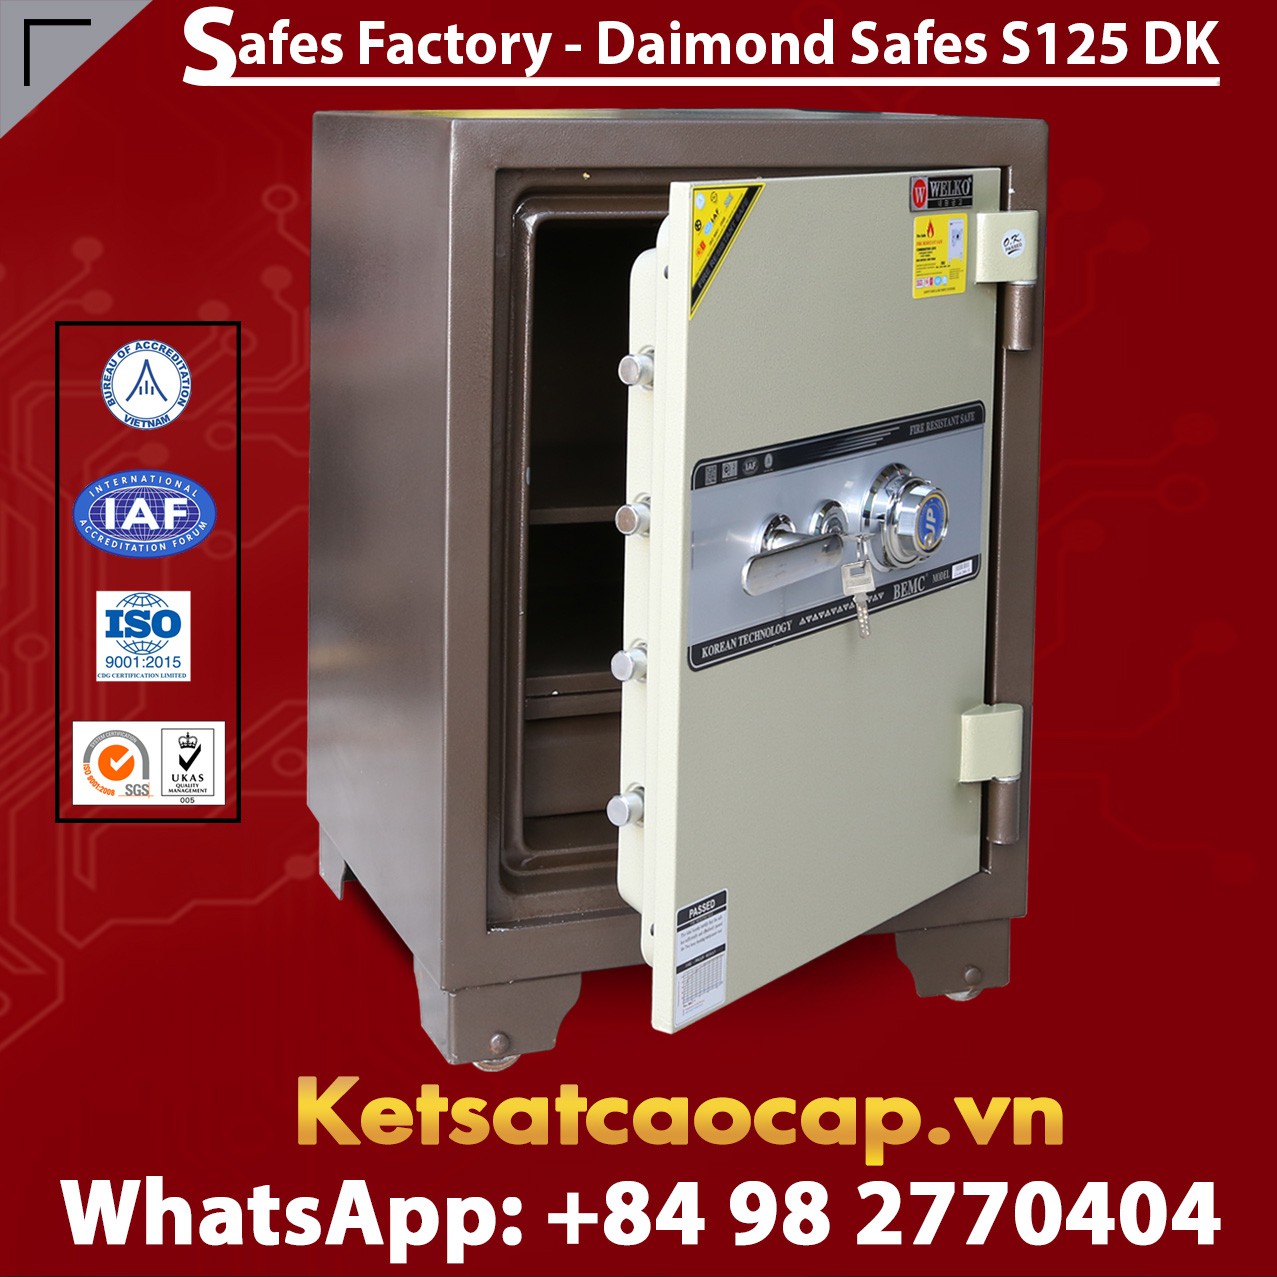 Depository Safes High Quality Factory Price cao cấp